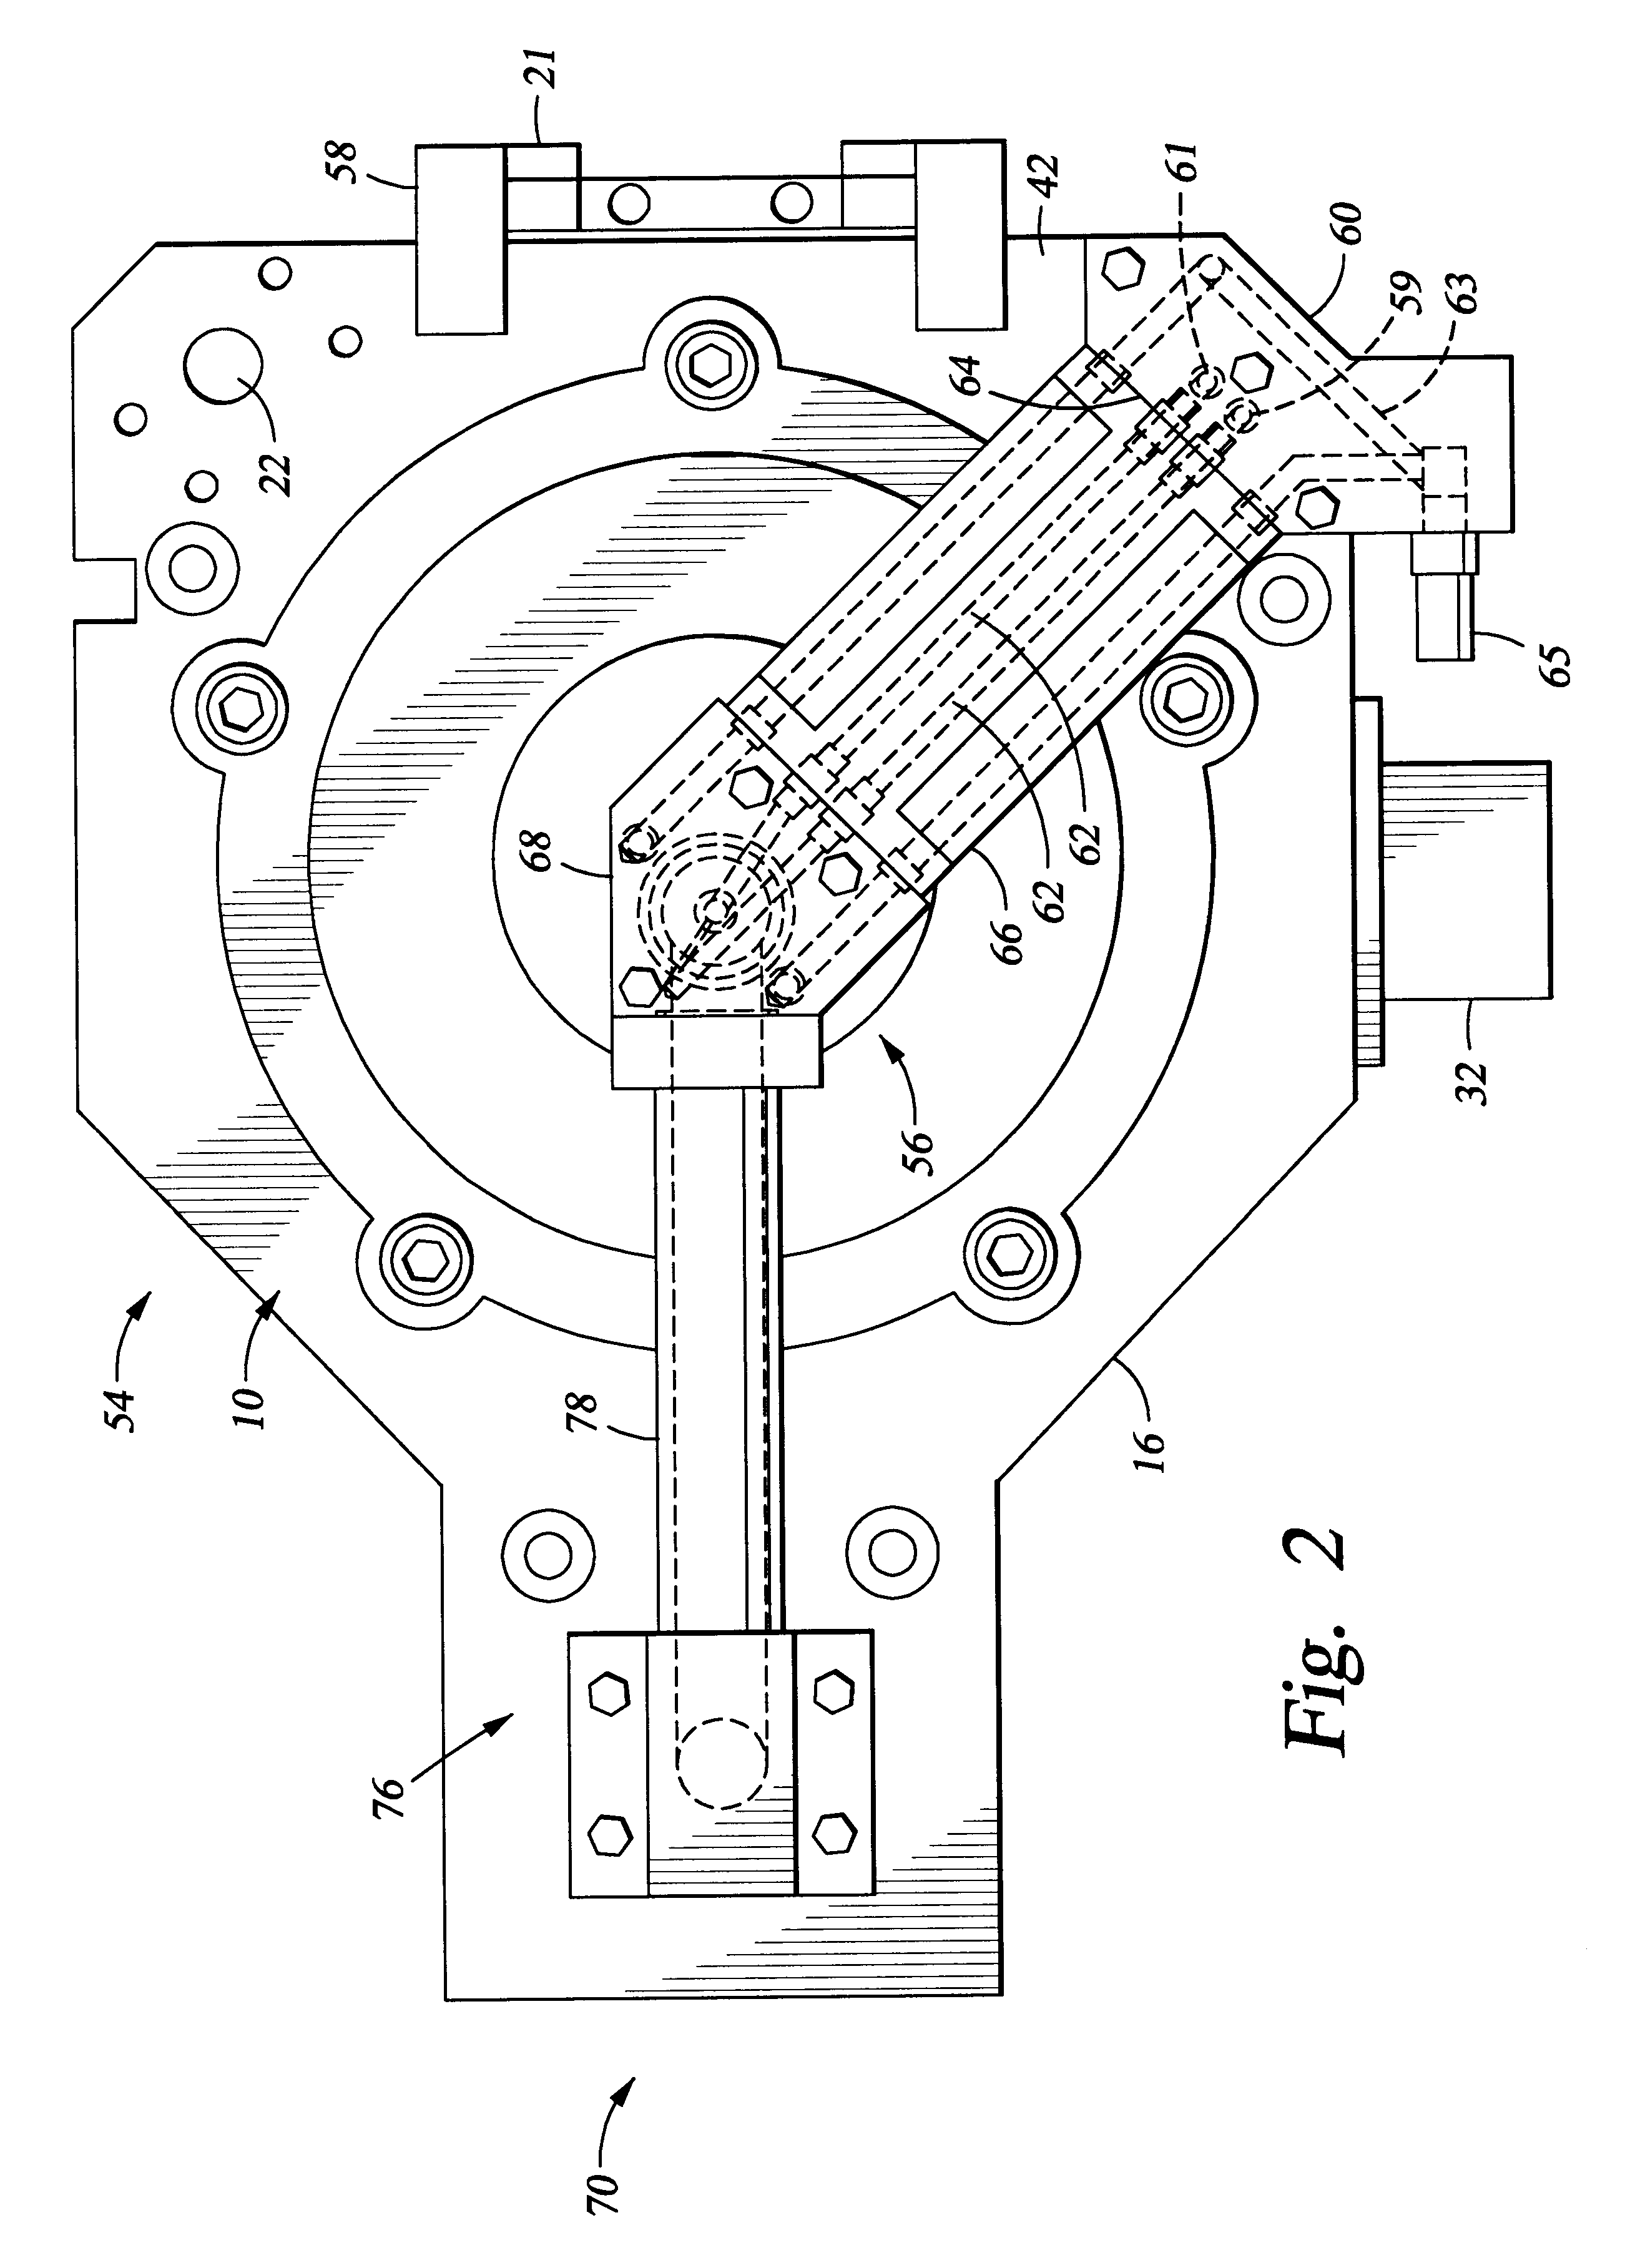 Apparatus and method for depositing low K dielectric materials